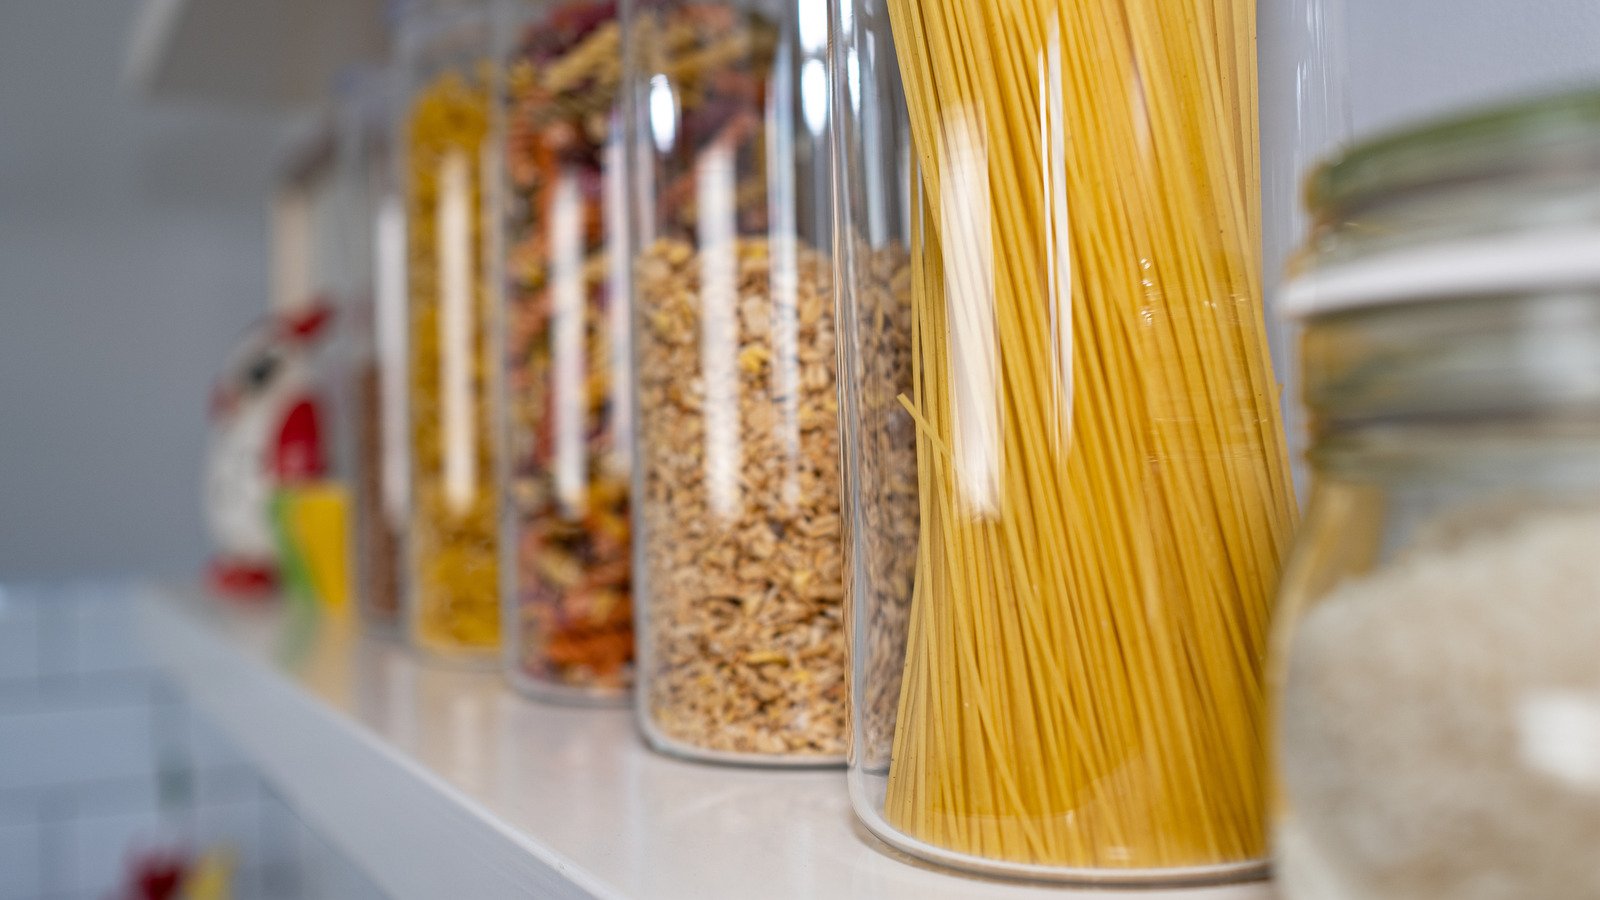 15 Items You Can Use To Organize Your Pantry